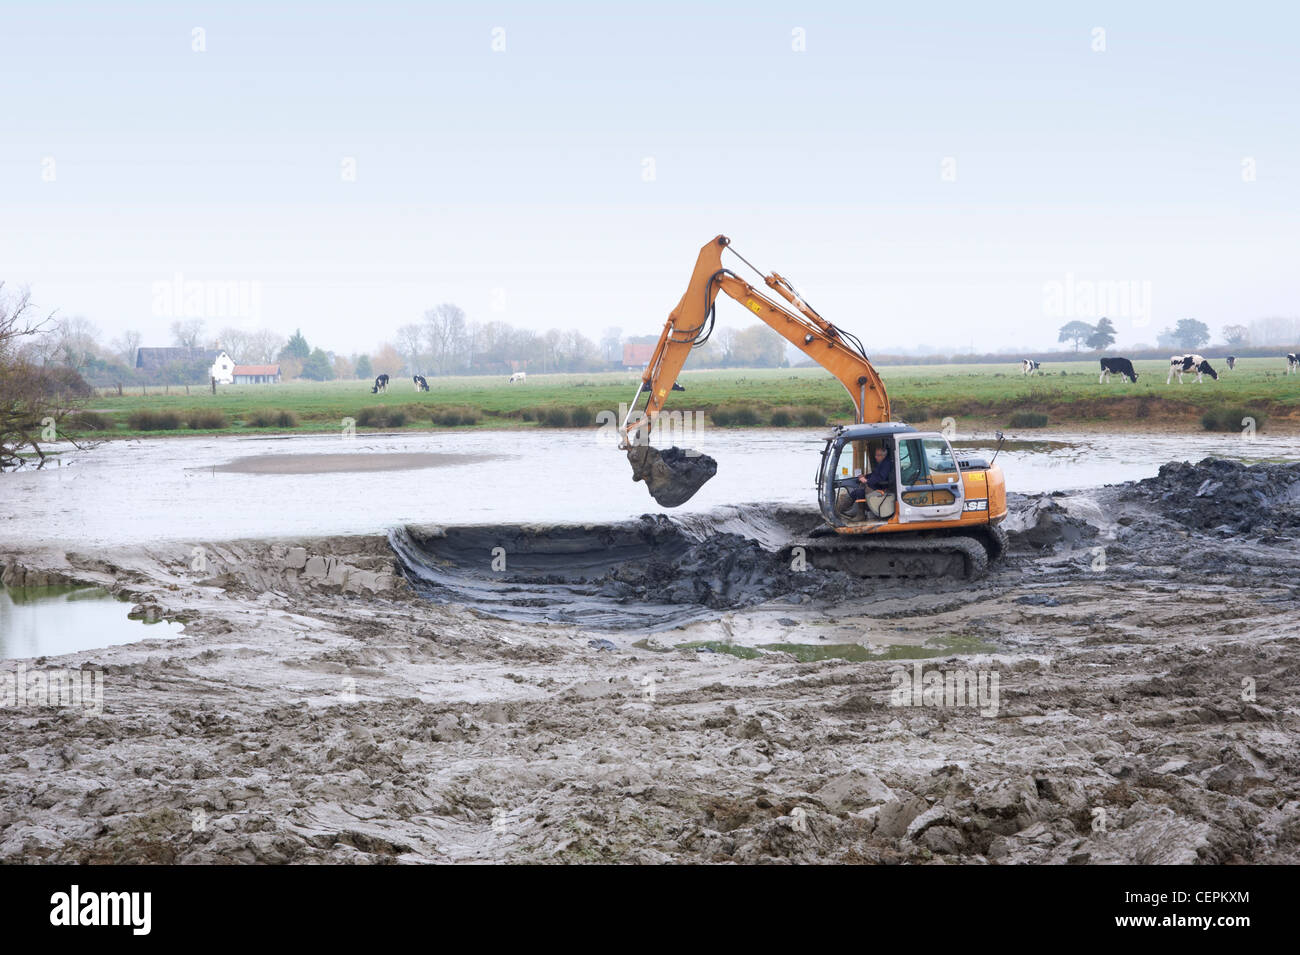 A pond being dredged with a small digger in a pastoral/rural setting with cows on the common in the background. Stock Photo